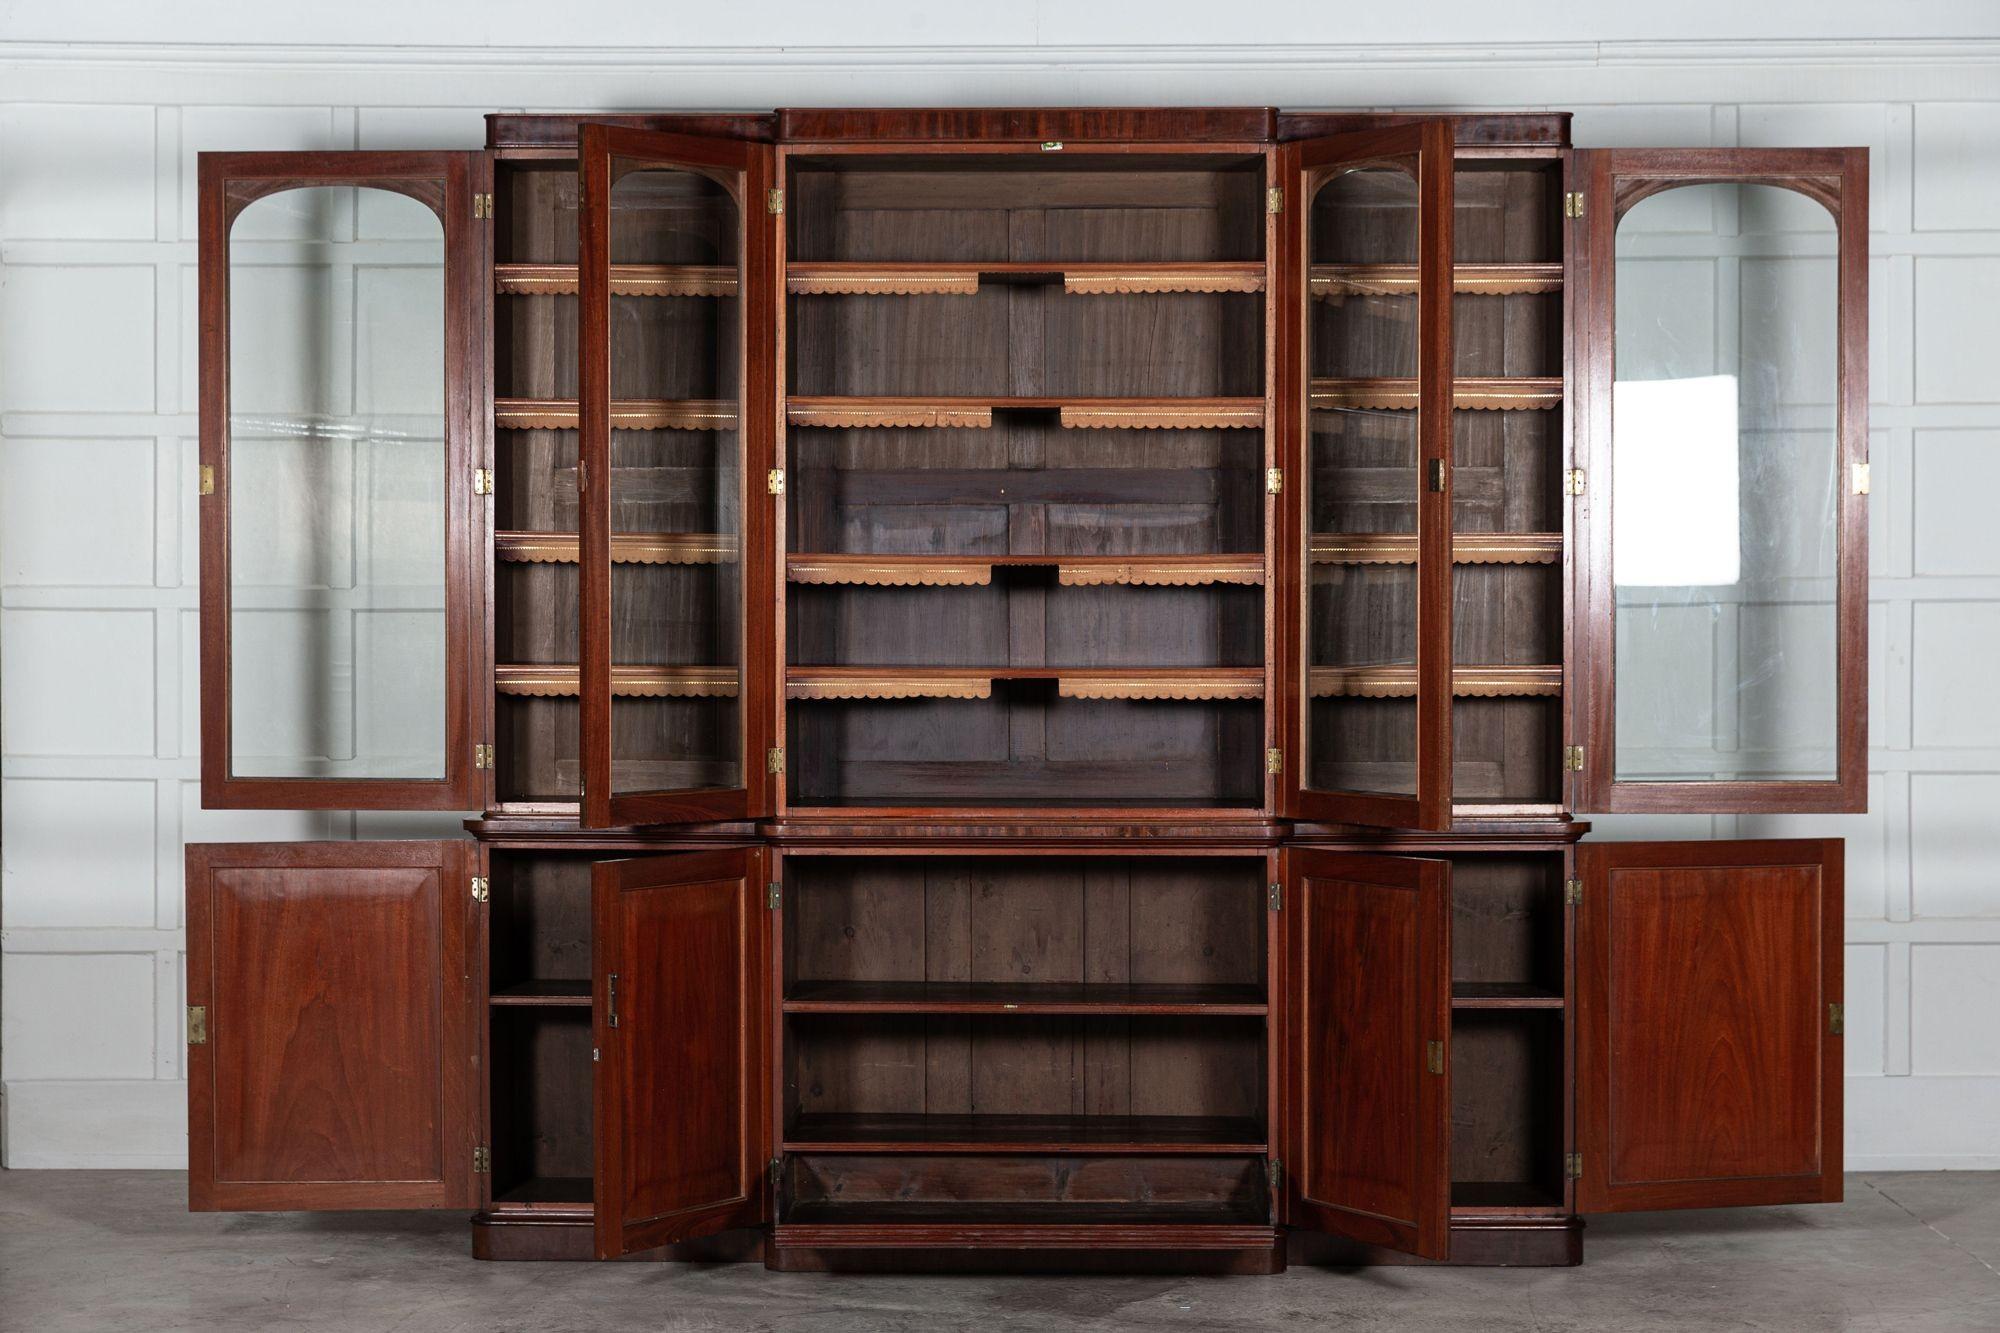 circa 1880
Large 19th C English mahogany glazed breakfront bookcase.
We can also customise existing pieces to suit your scheme/requirements. We have our own workshop, restorers and finishers. From adapting to finishing pieces including, stripping,